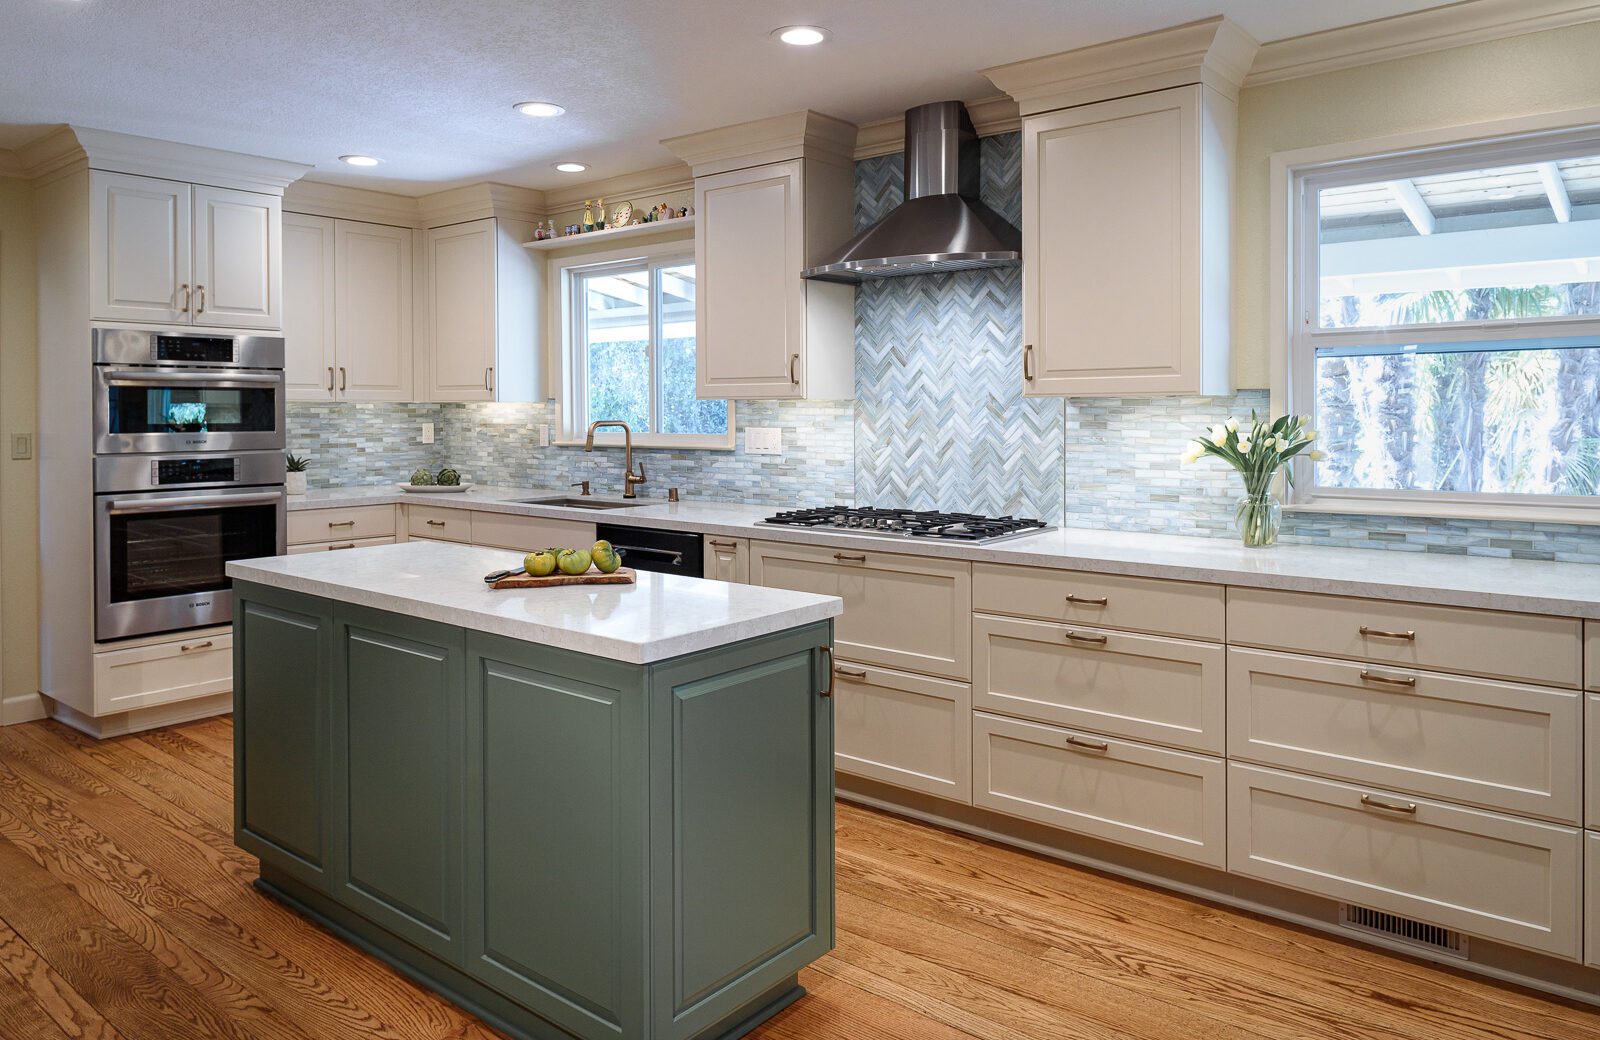 two tone kitchen green island white upper and lower cabinets wood floor